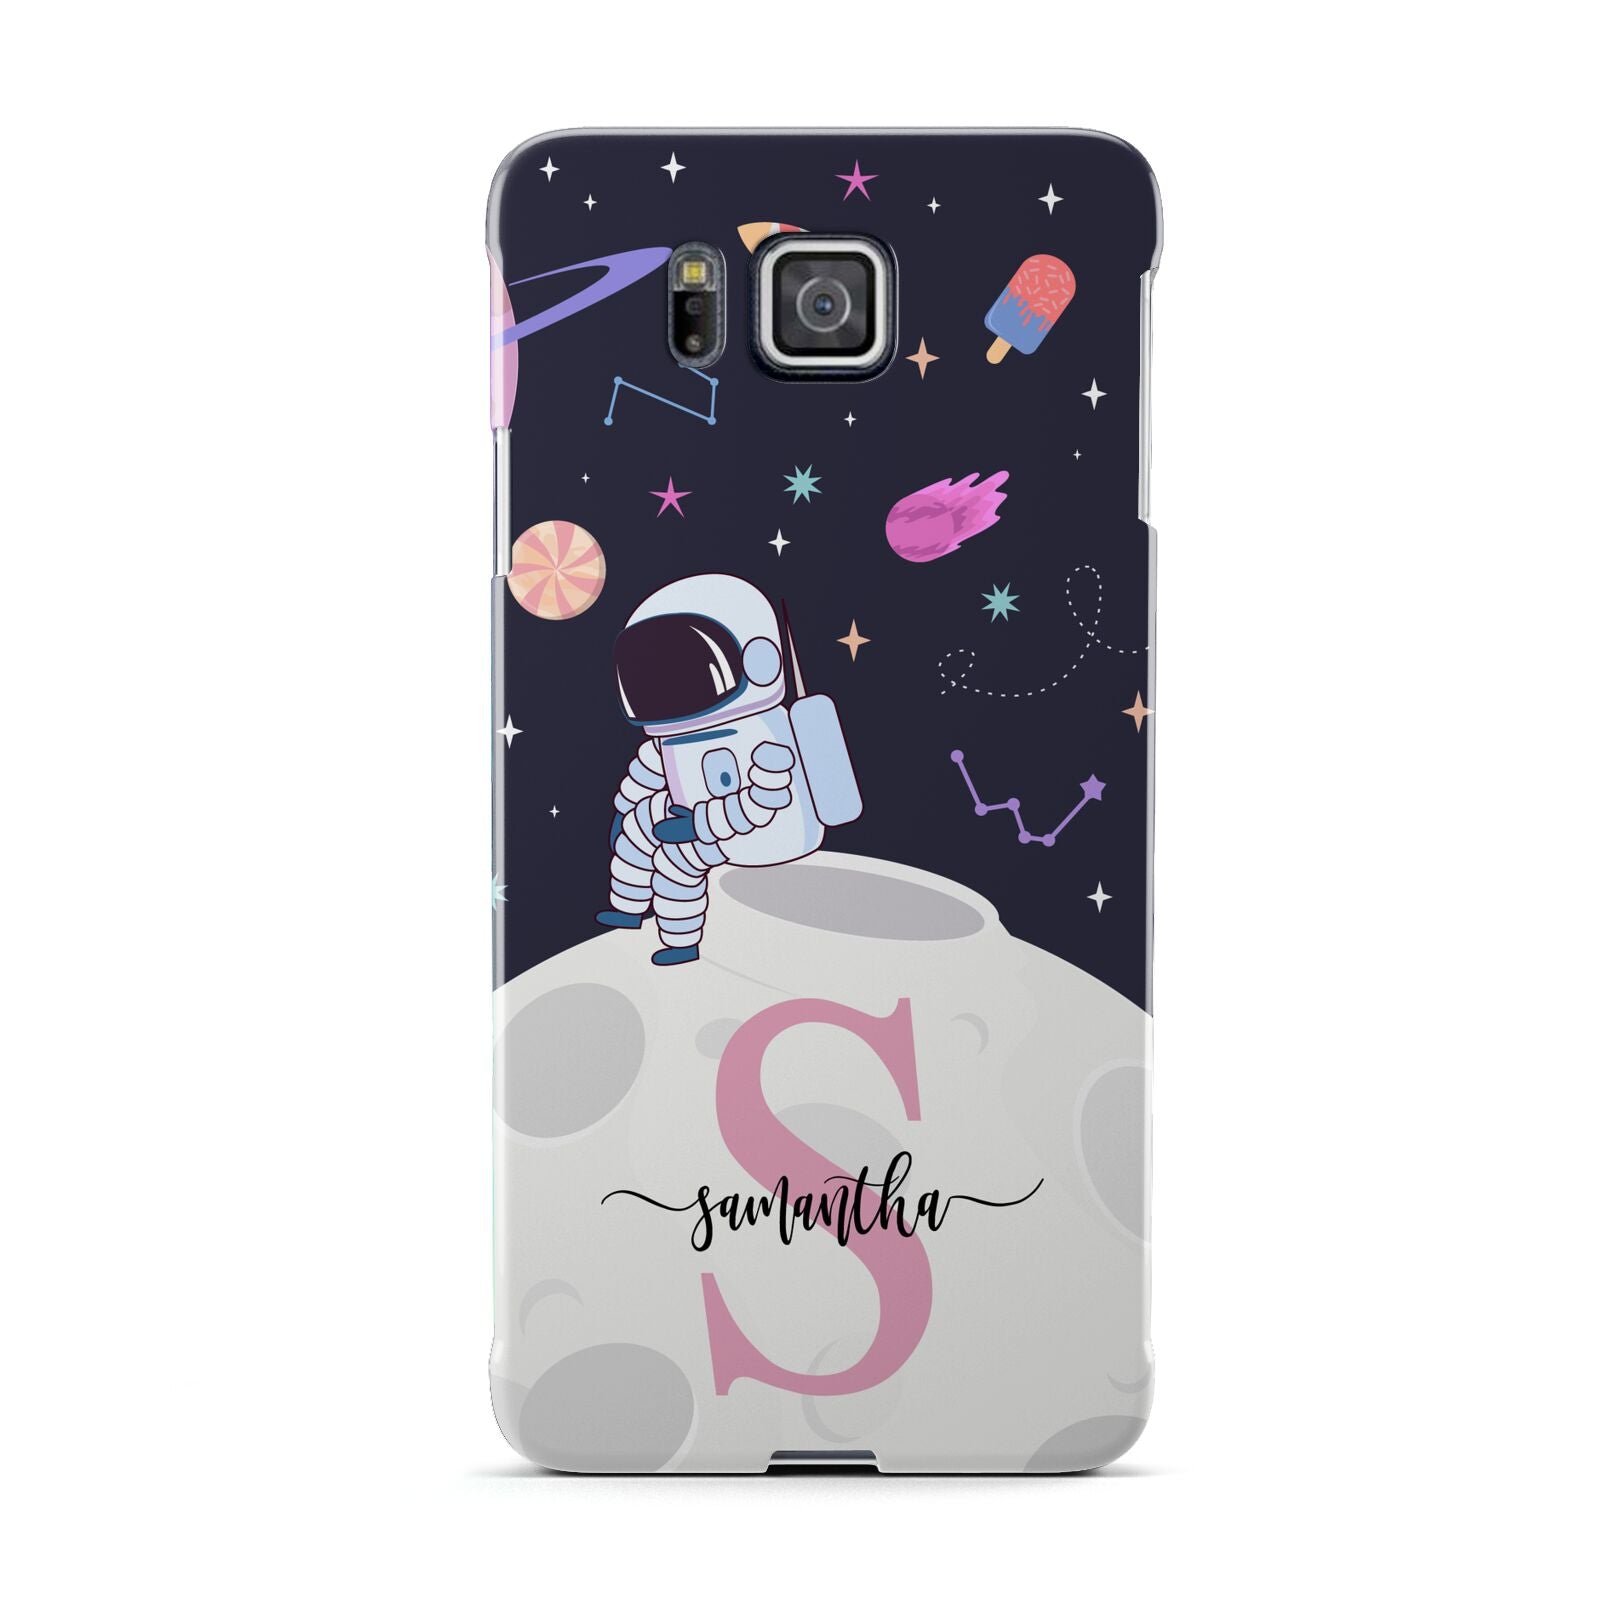 Astronaut in Candy Space with Name Samsung Galaxy Alpha Case